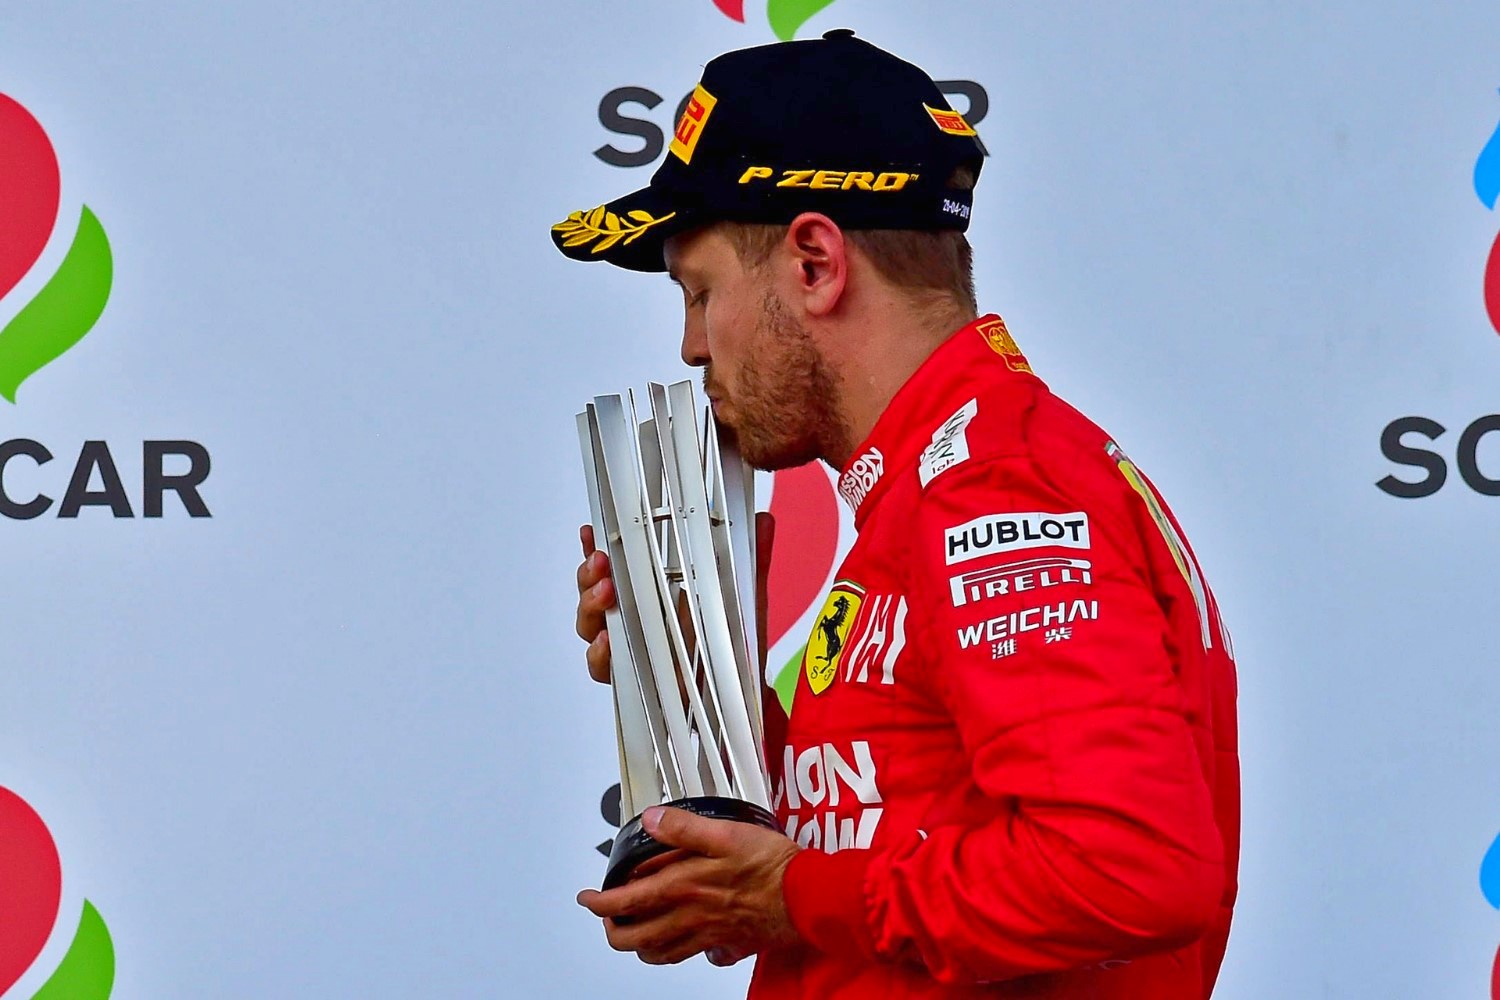 Vettel saddened that for the 5th year in a row his Ferrari is no match for the Aldo Costa designed Mercedes